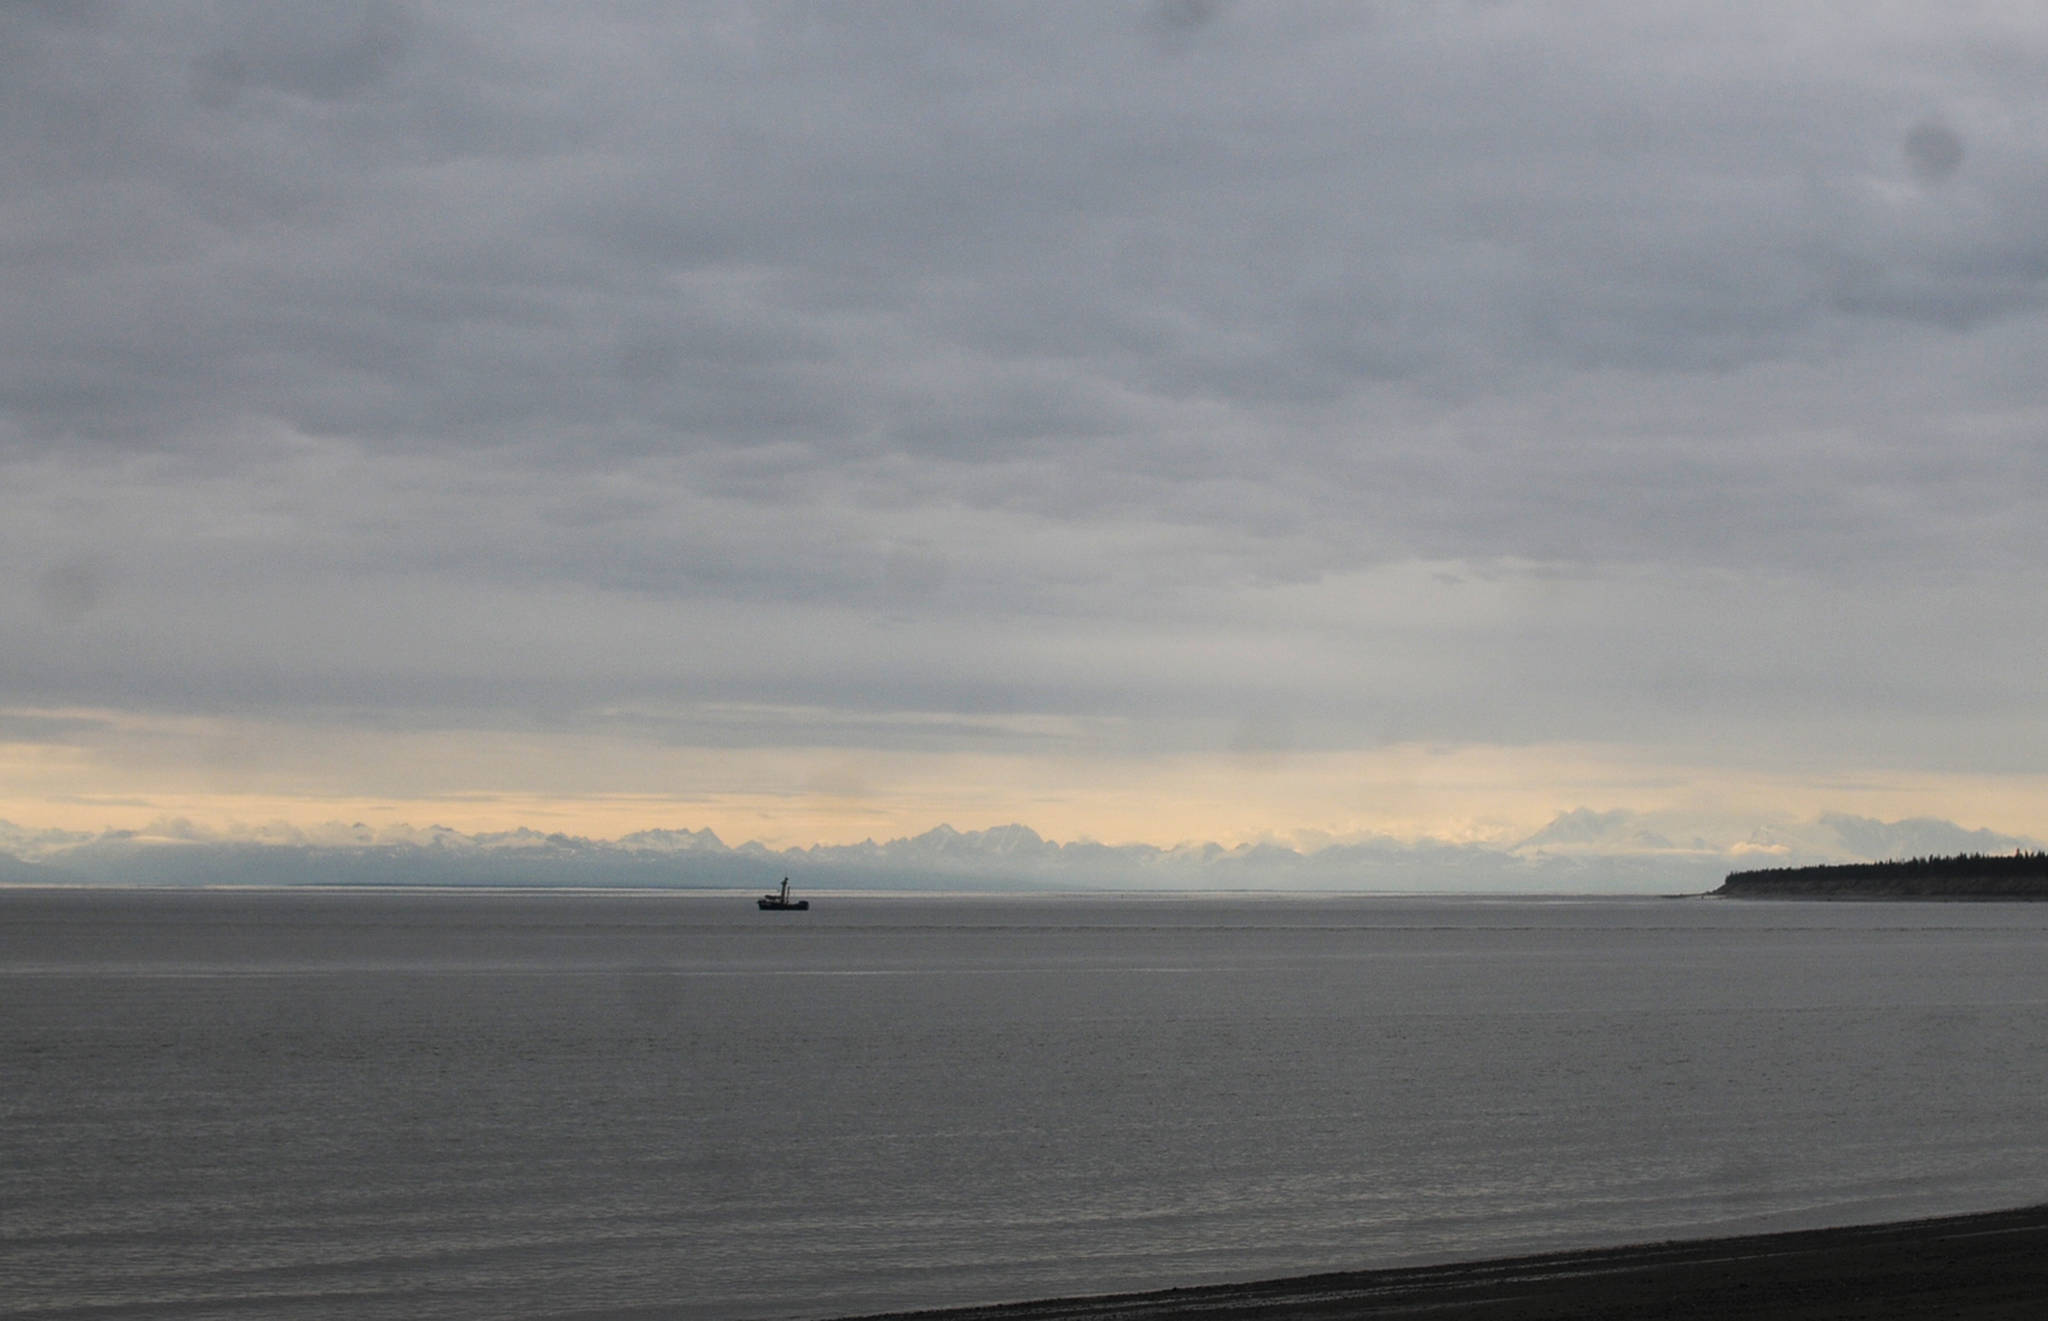 In this July 2016 photo, a drift gillnet fishing vessel floats in Cook Inlet just off the coast of the Kenai Peninsula near Kenai, Alaska. A thin season for sockeye and kings has led to restrictions in all fisheries, though drifters are seeing more chum salmon than usual in Upper Cook Inlet. (Photo by Elizabeth Earl/Peninsula Clarion, file)